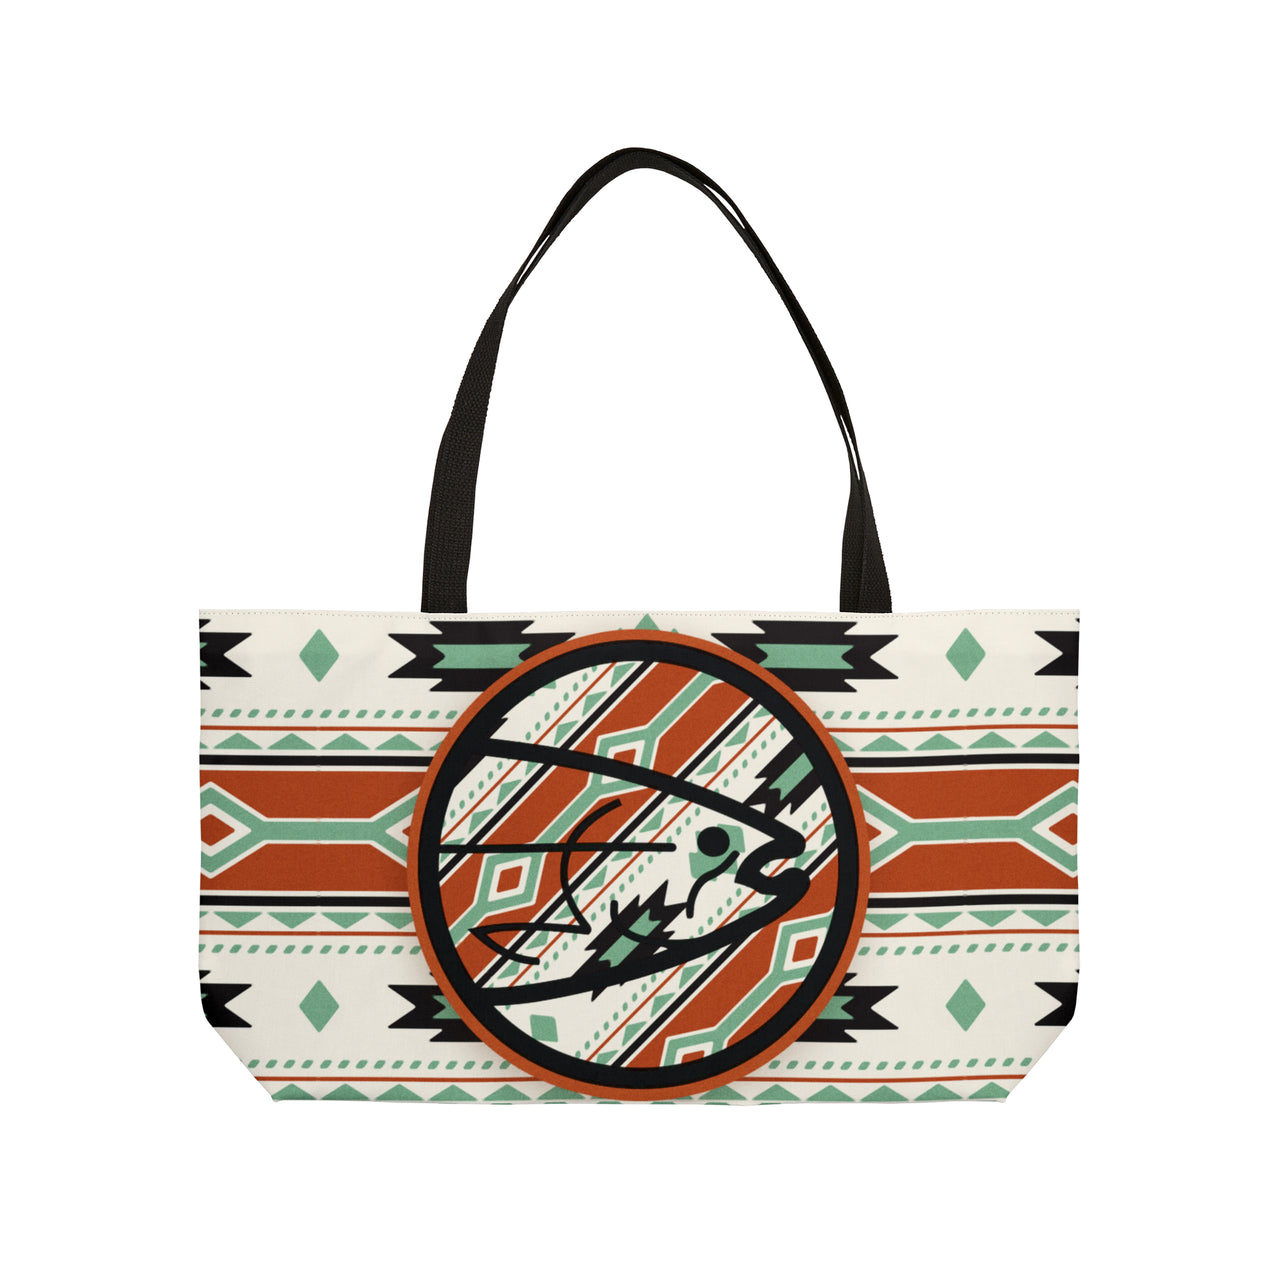 STLHD Out West Tote Bag